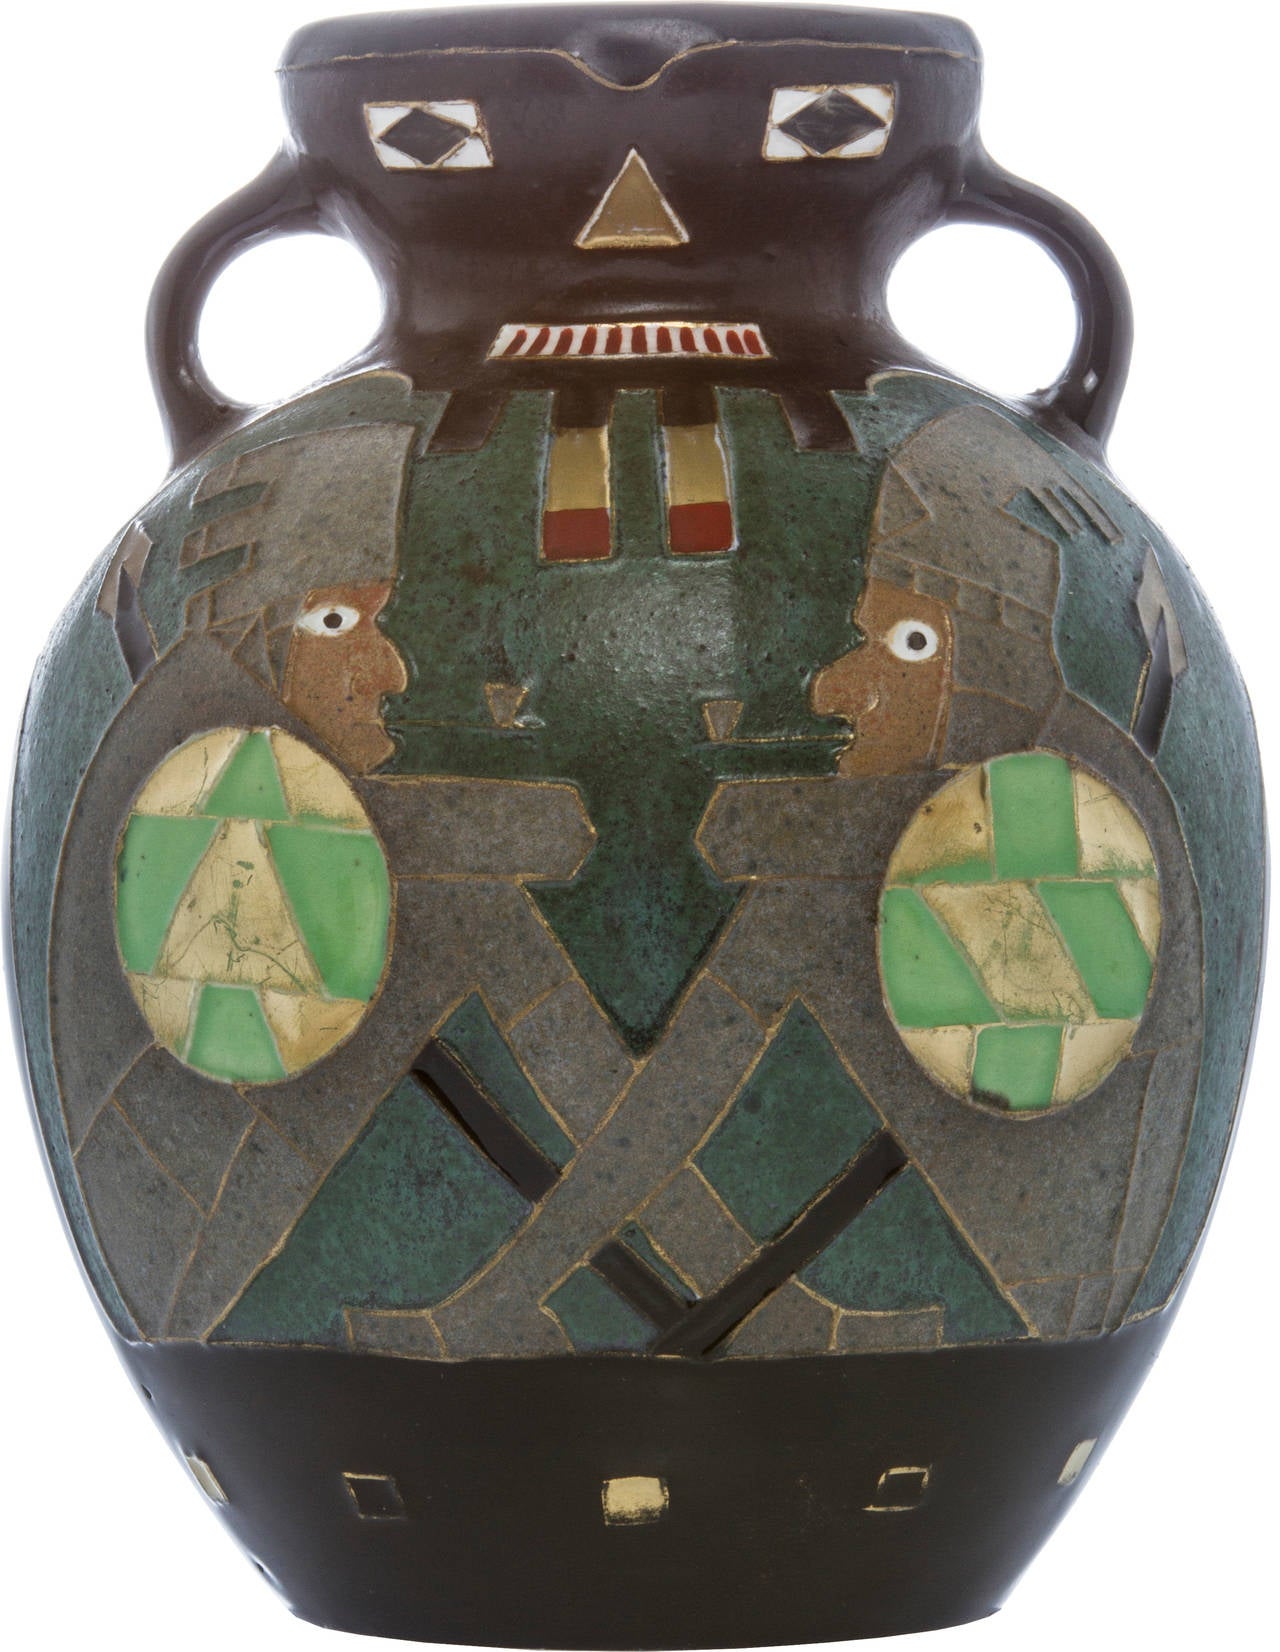 This piece is ovoid in form and decorated with,
Of handled ovoid form, decorated with figures smoking pipes.
Height 7 5/8 inches.